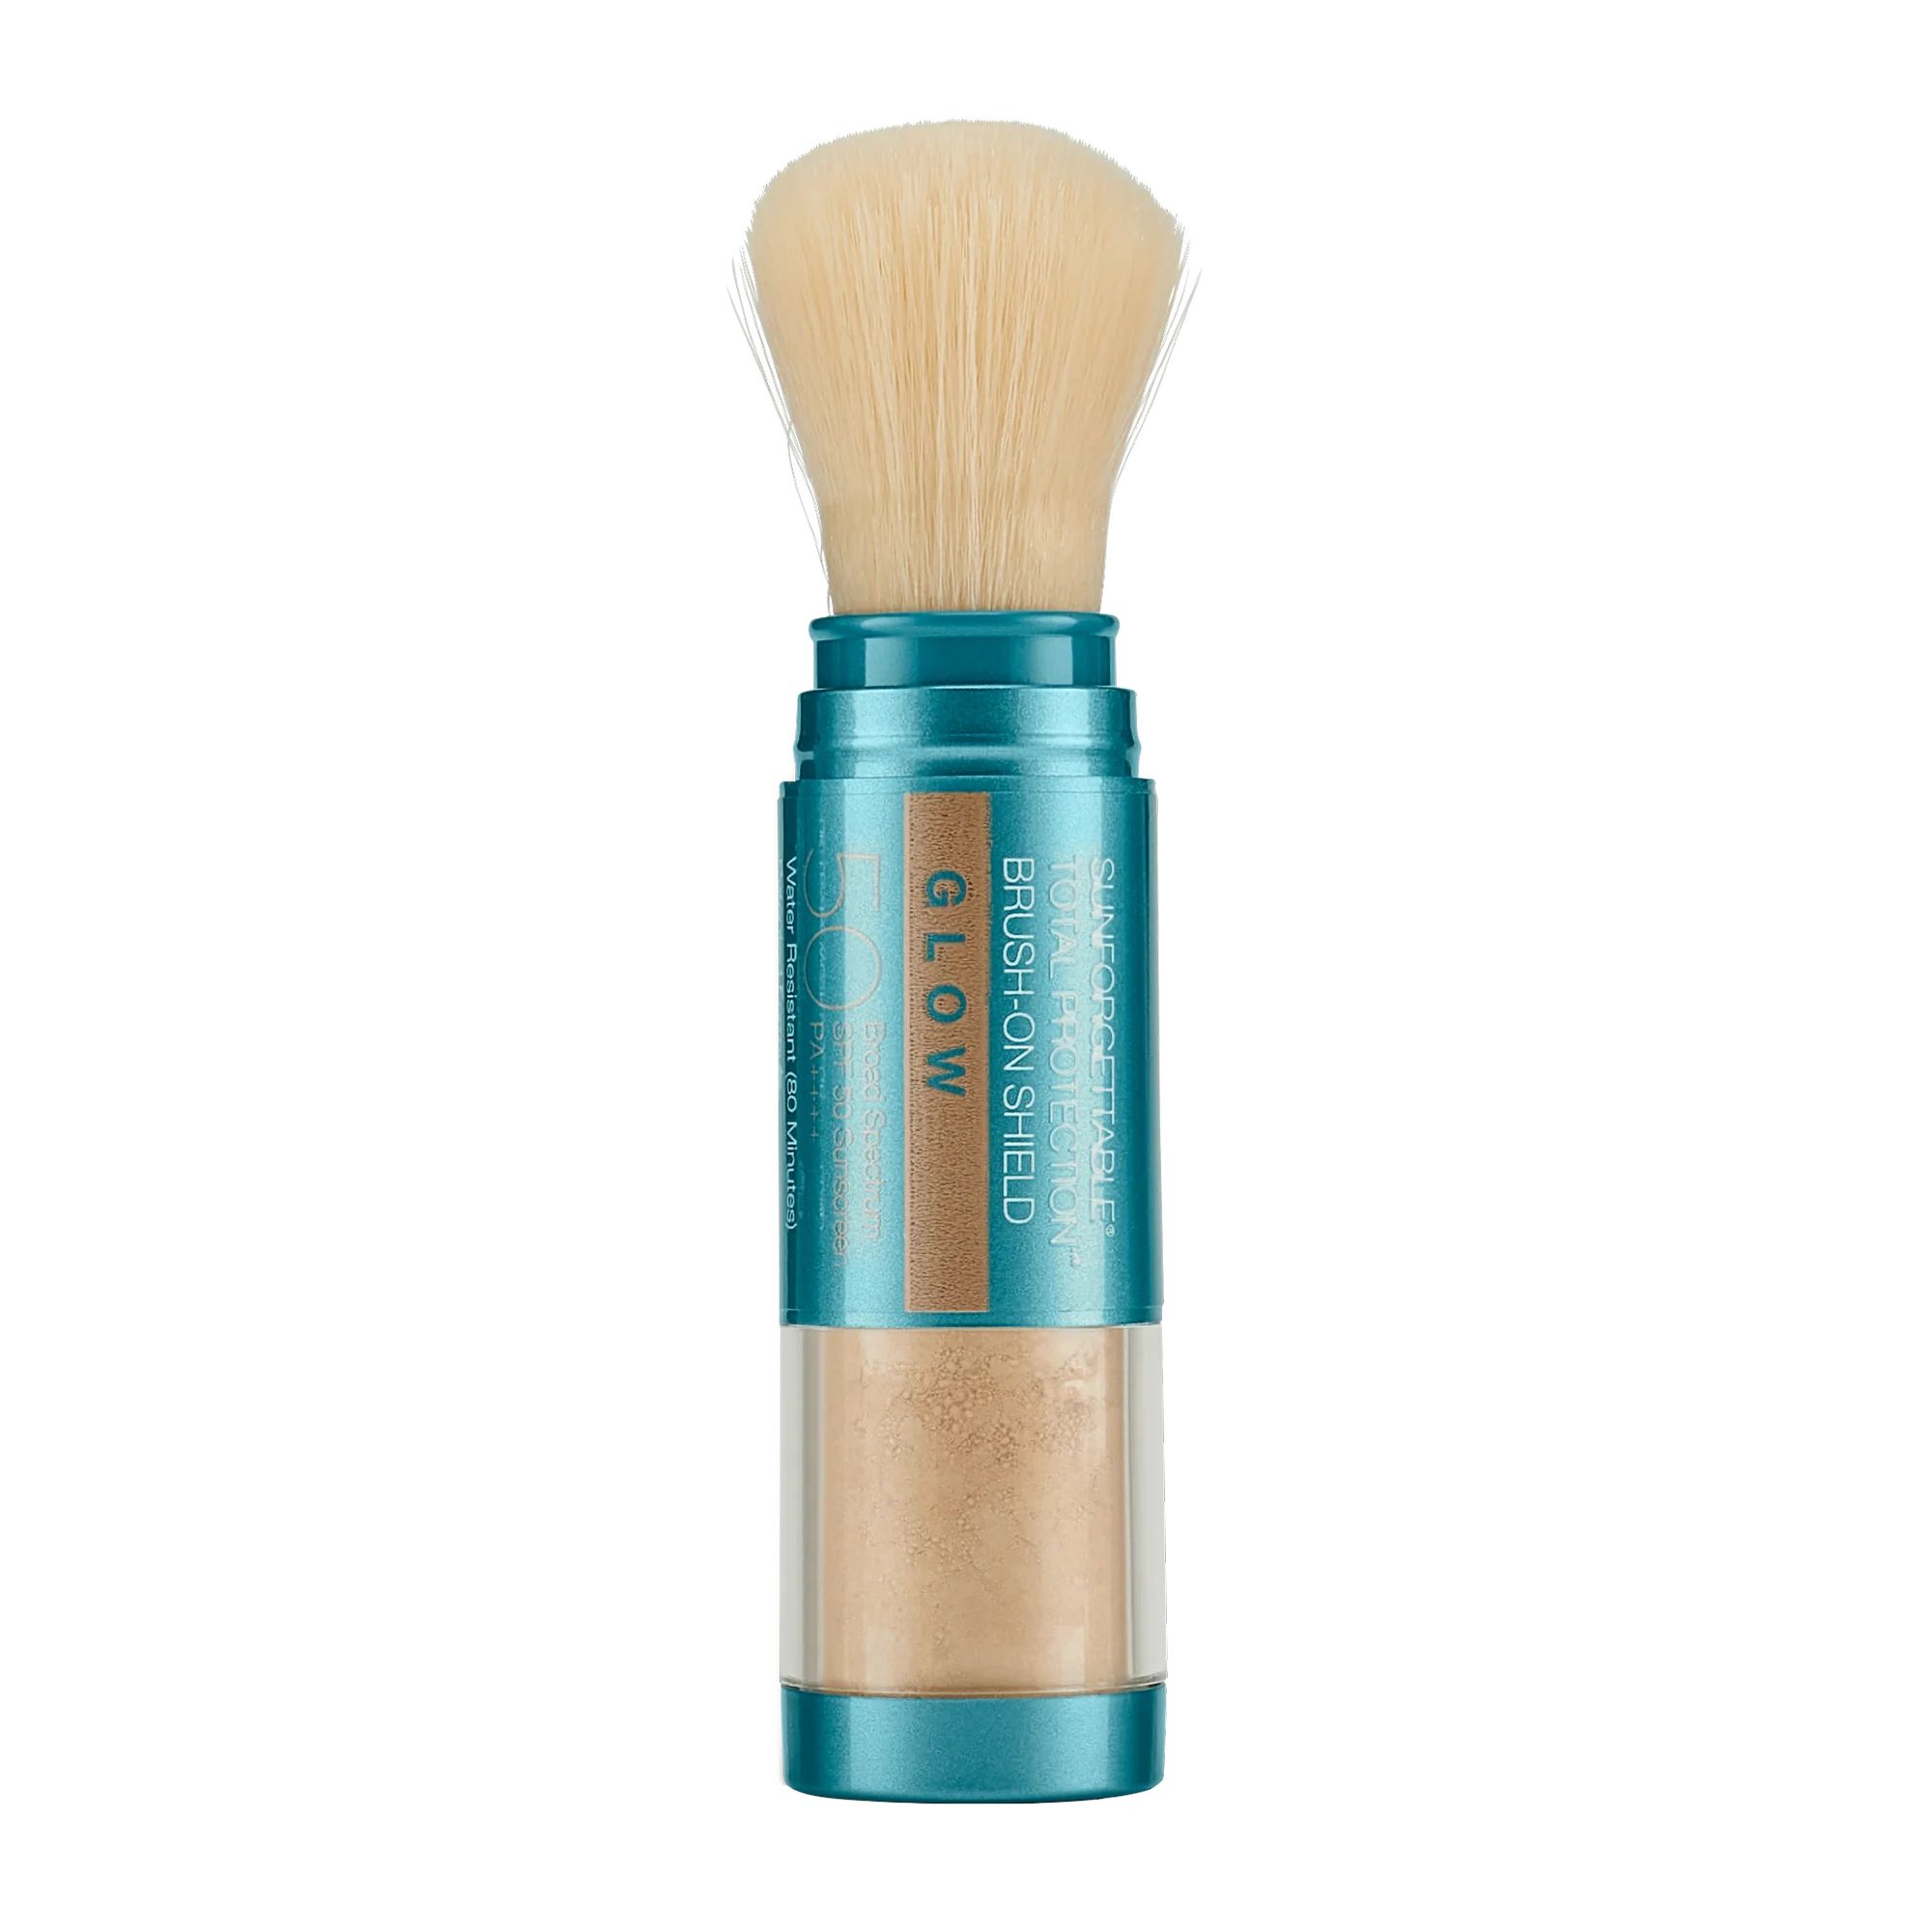 Sunforgettable® Total Protection® Brush-On Shield Glow SPF 50 | Colorescience